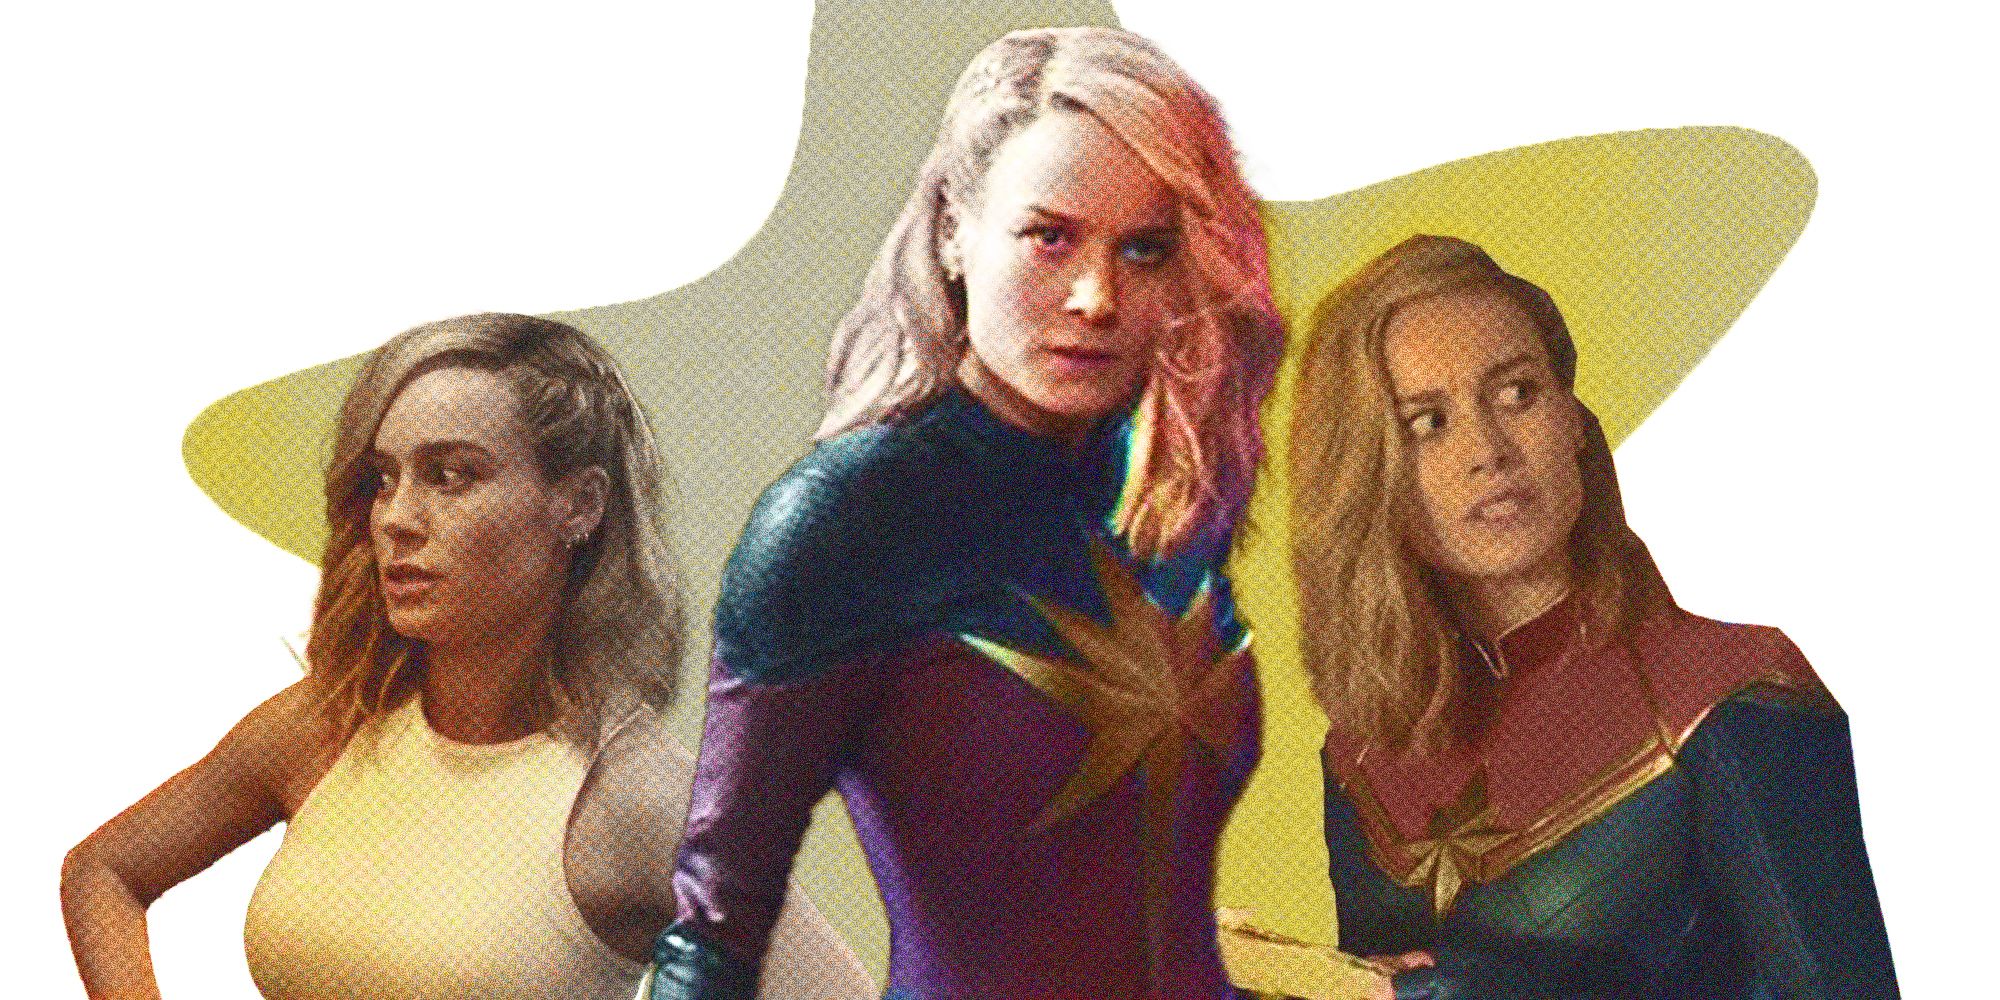 The Marvels cast: Who stars with Brie Larson in MCU film?